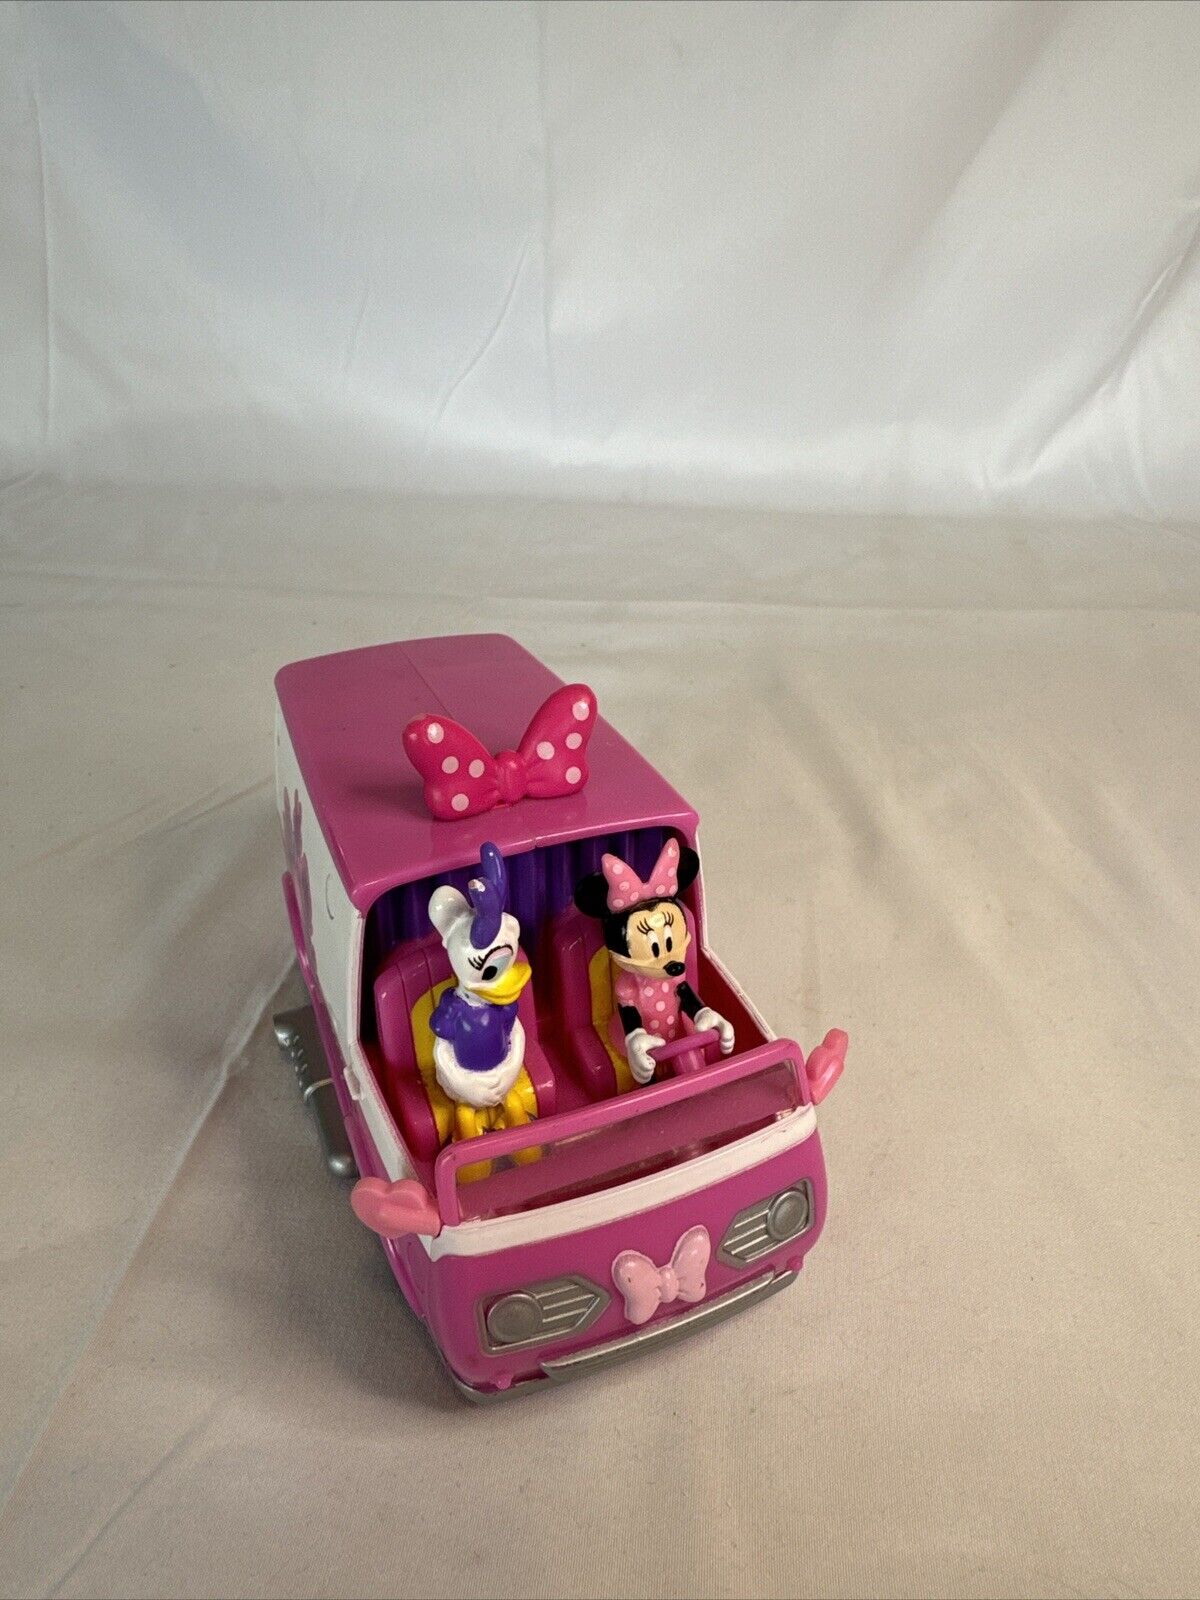 DISNEY Minnie Mouse & Daisy Duck Rolling Pink Van Car Toy Plastic Small